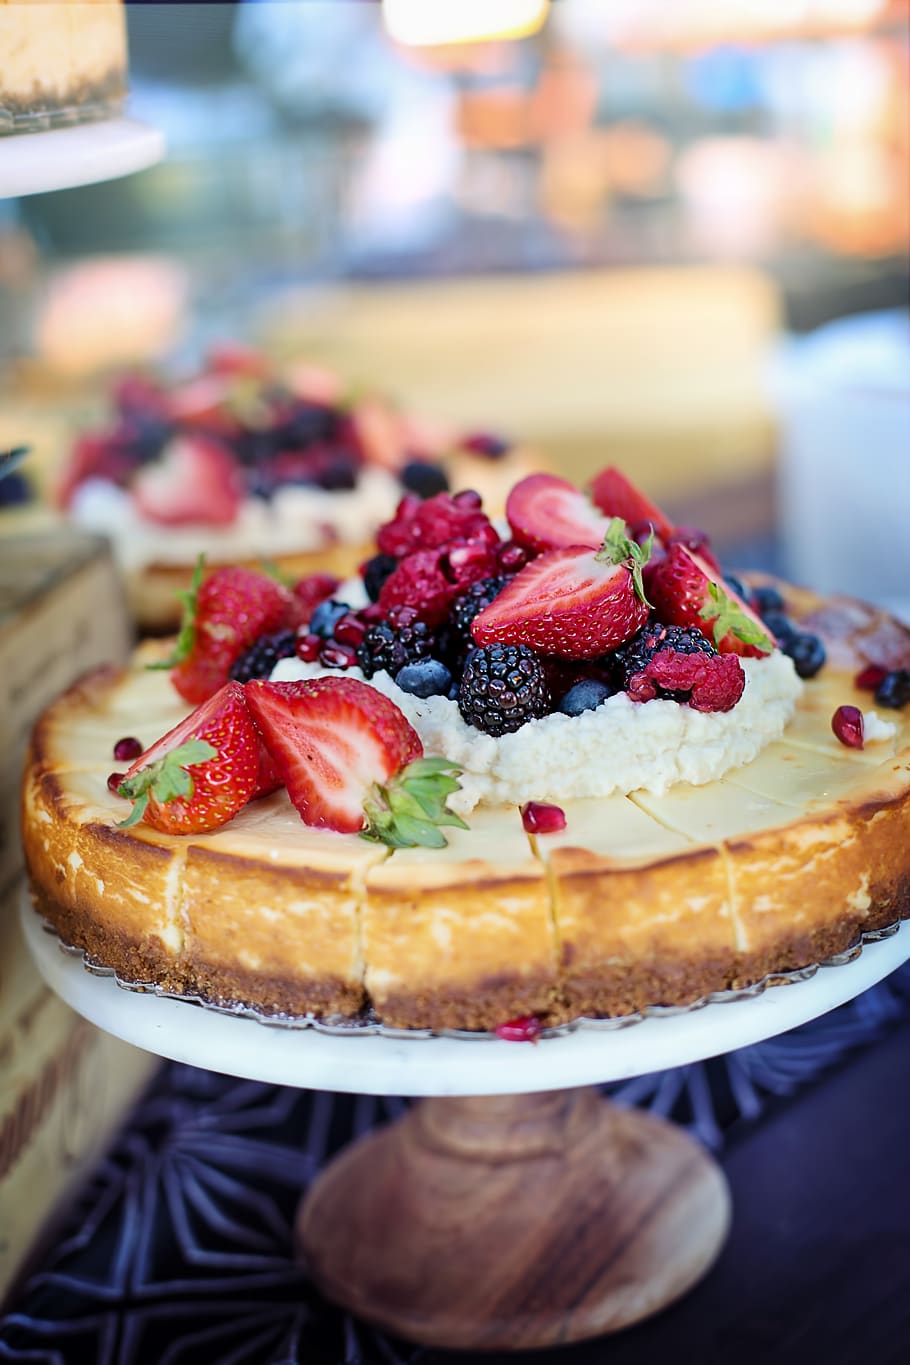 cheesecake, fruit, strawberries, berries, sweet, cake, dessert, sweets, delicious, food and drink